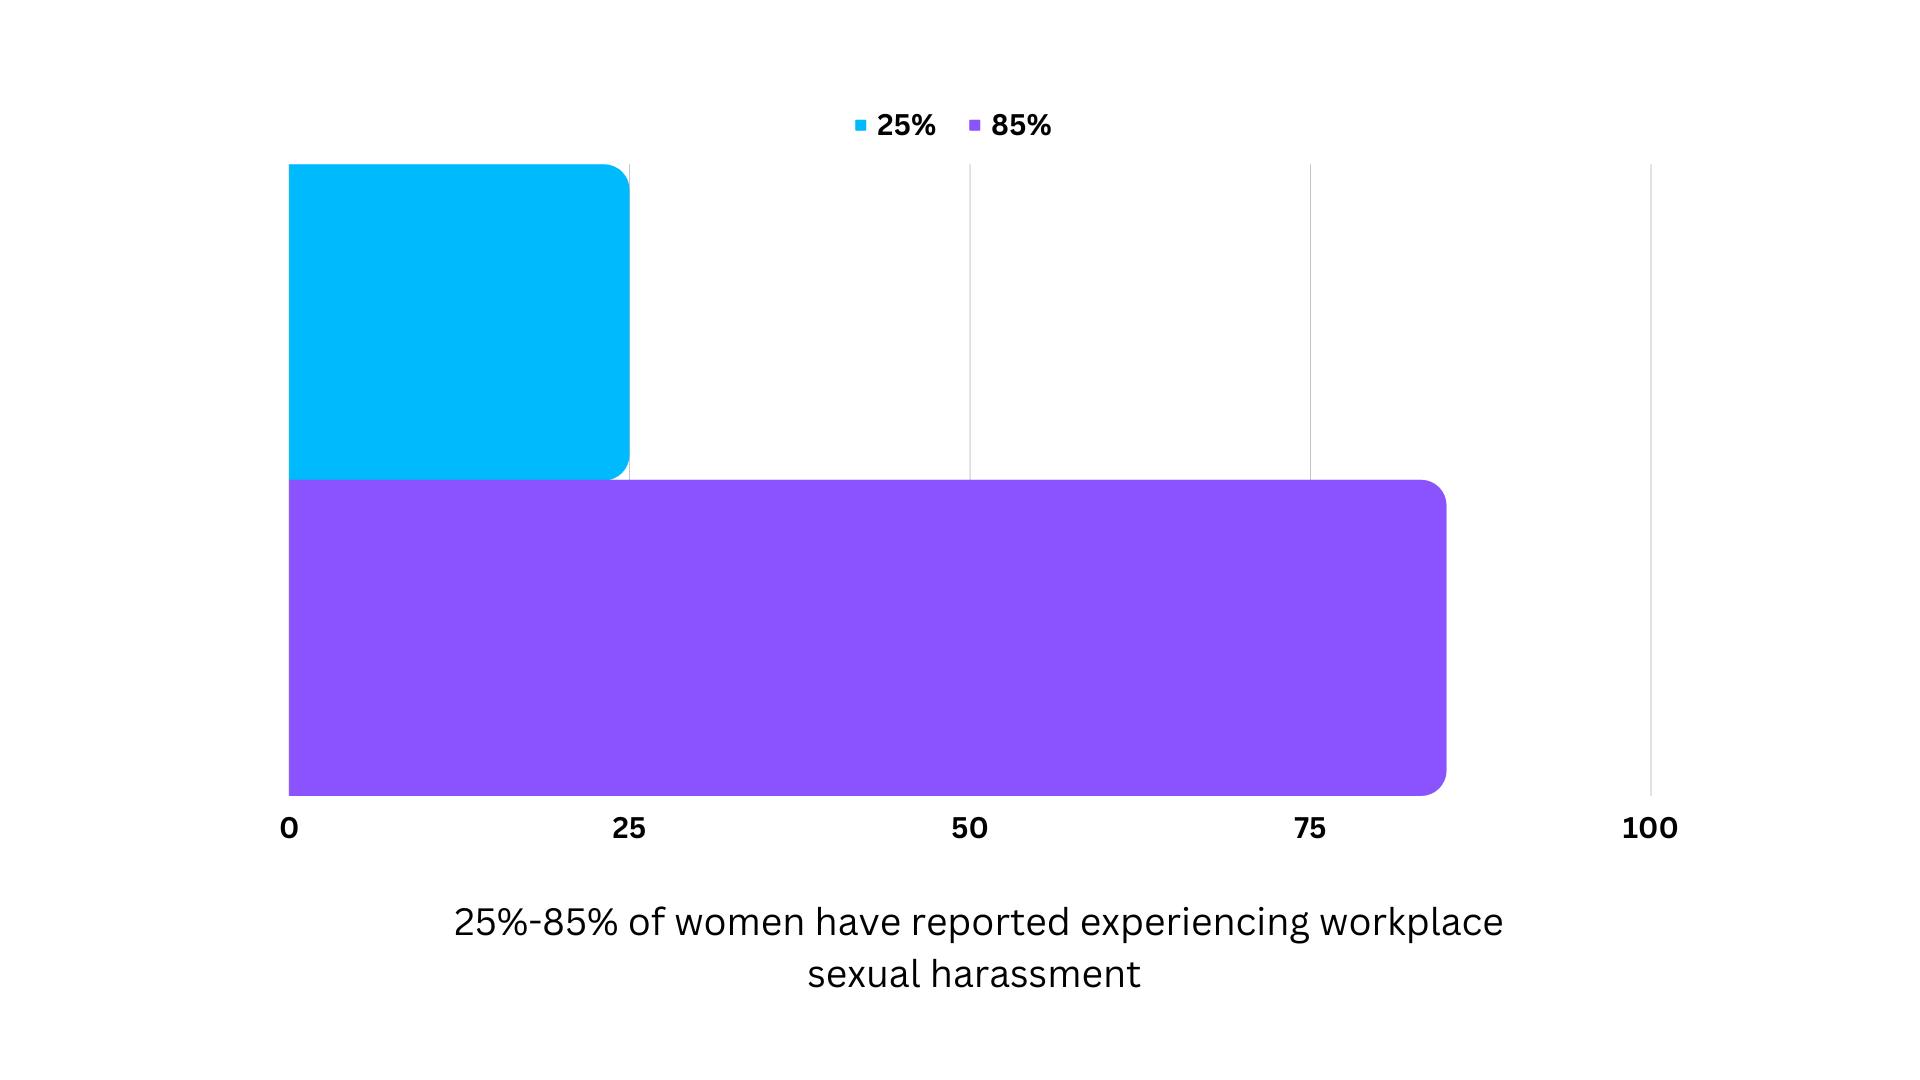 Sexual Harassment Statistics - The extent of workplace sexual harassment issues